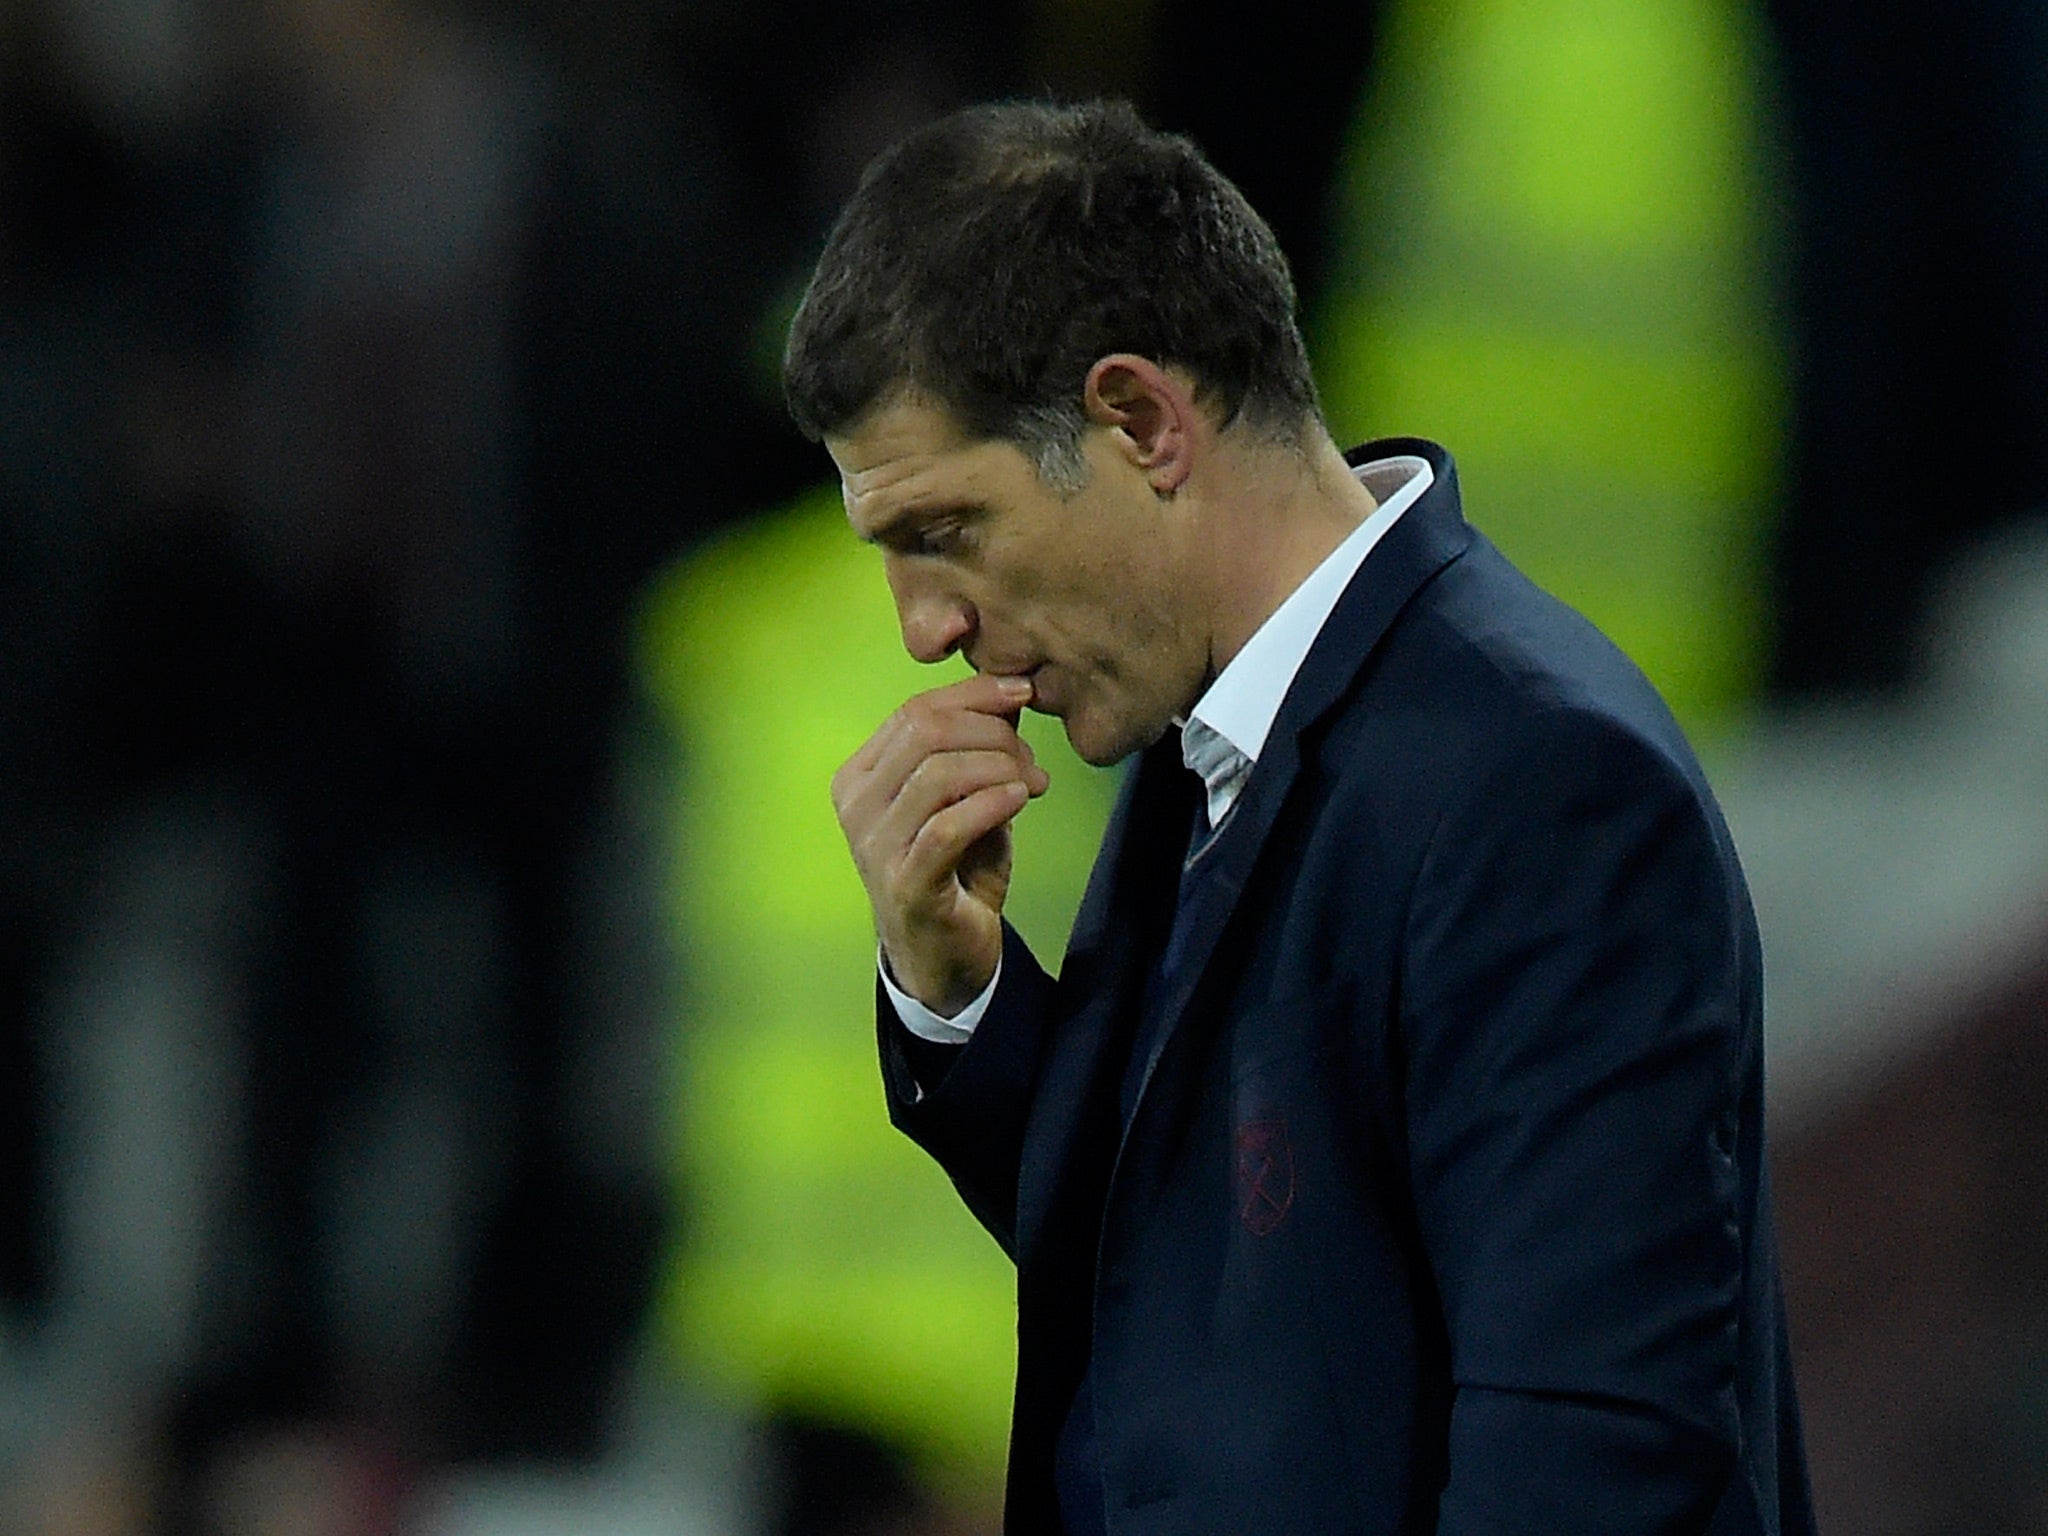 Bilic saw his side put in a dismal display in the defeat to Arsenal